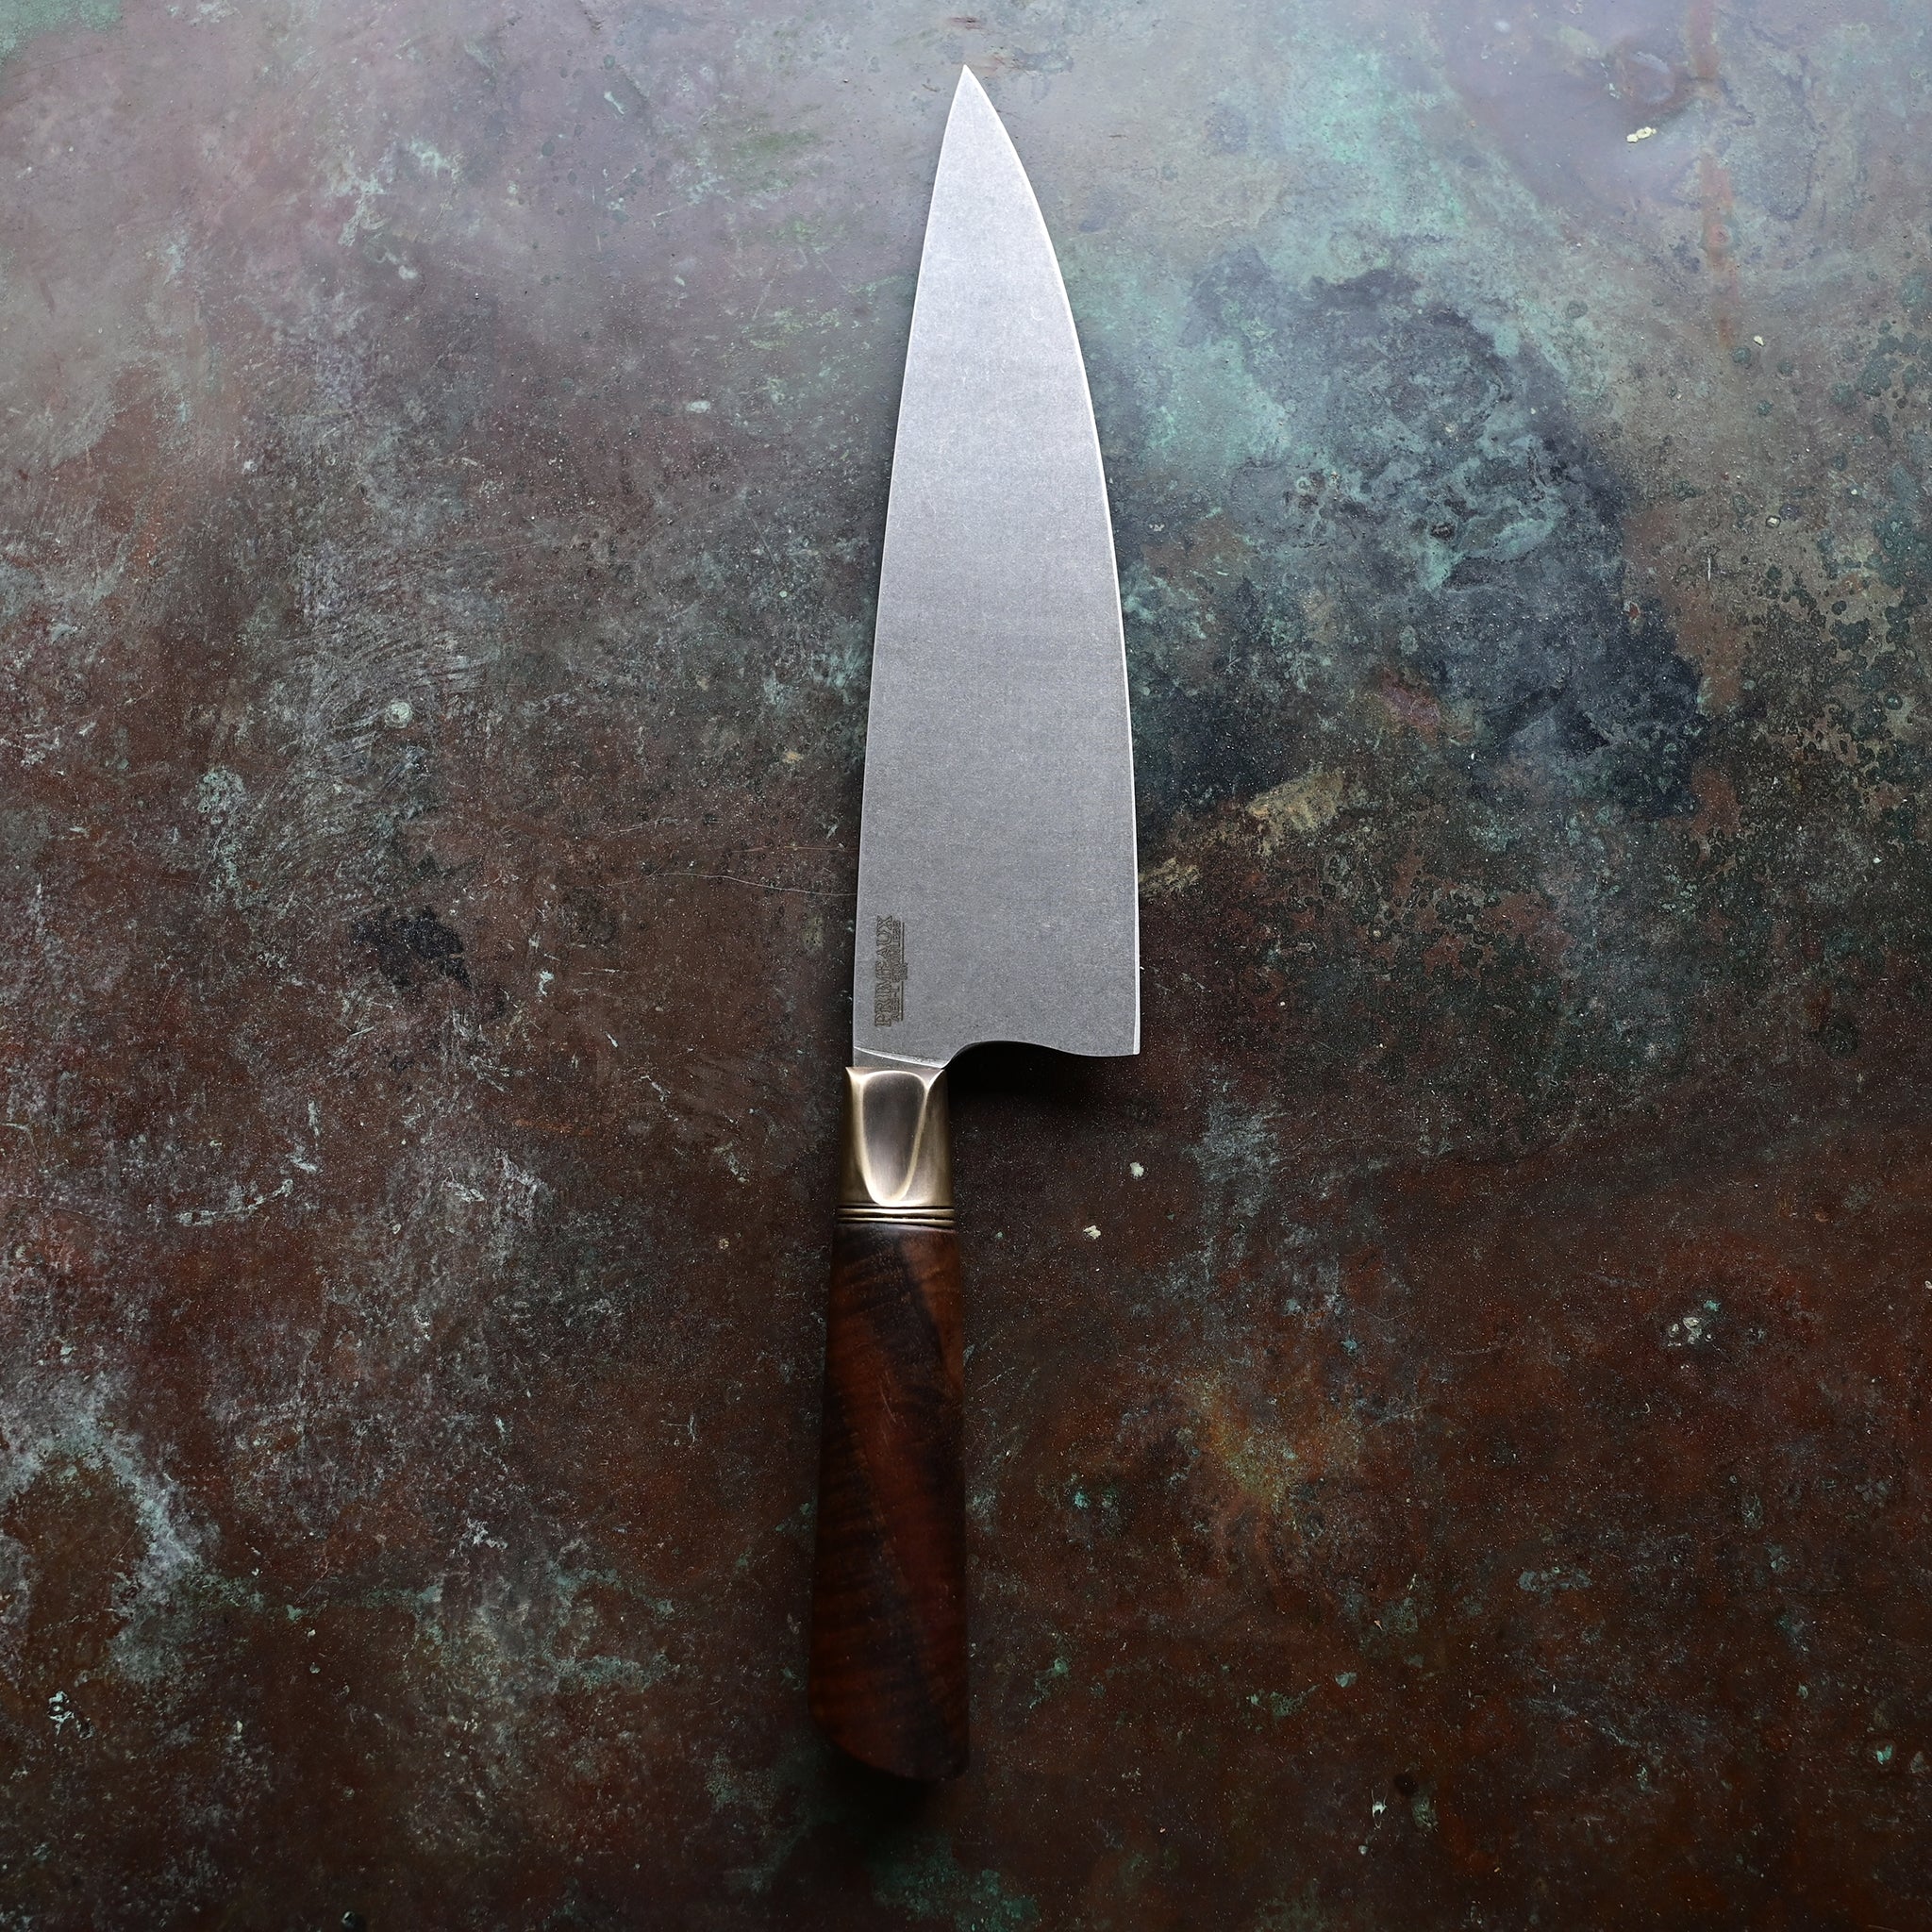 A chef knife with a stainless AEB-L steel blade, aged bronze bolster, and Claro Walnut handle, resting on a concrete surface